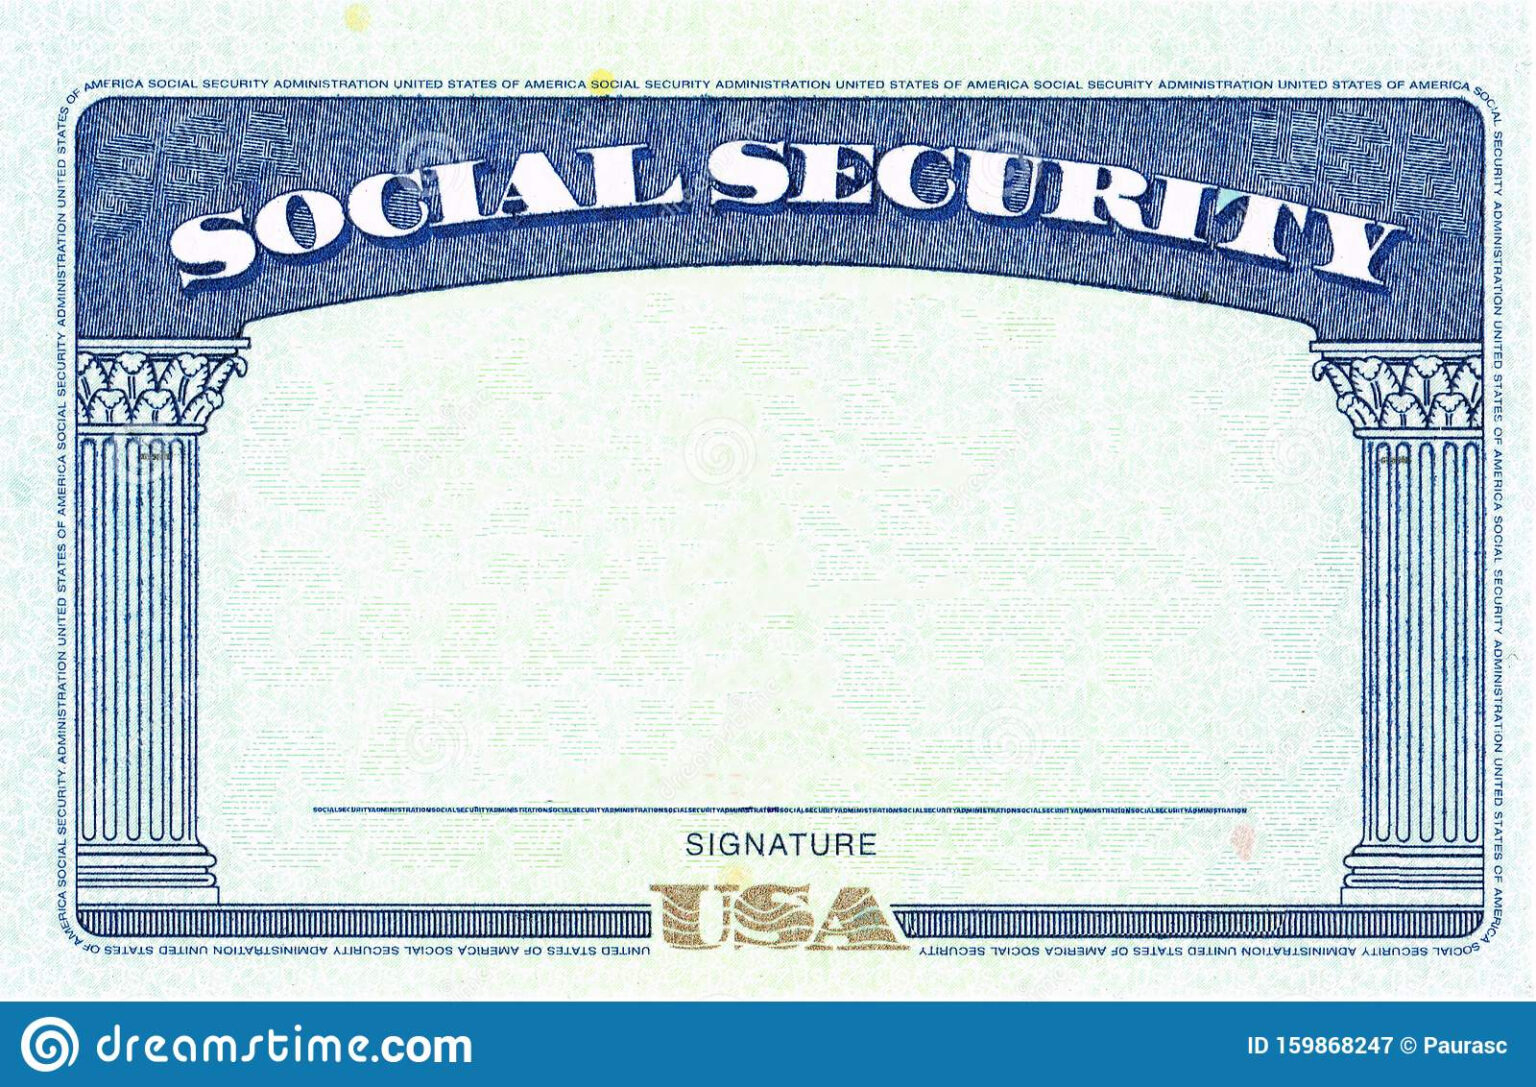 Fascinating Blank Social Security Card Template